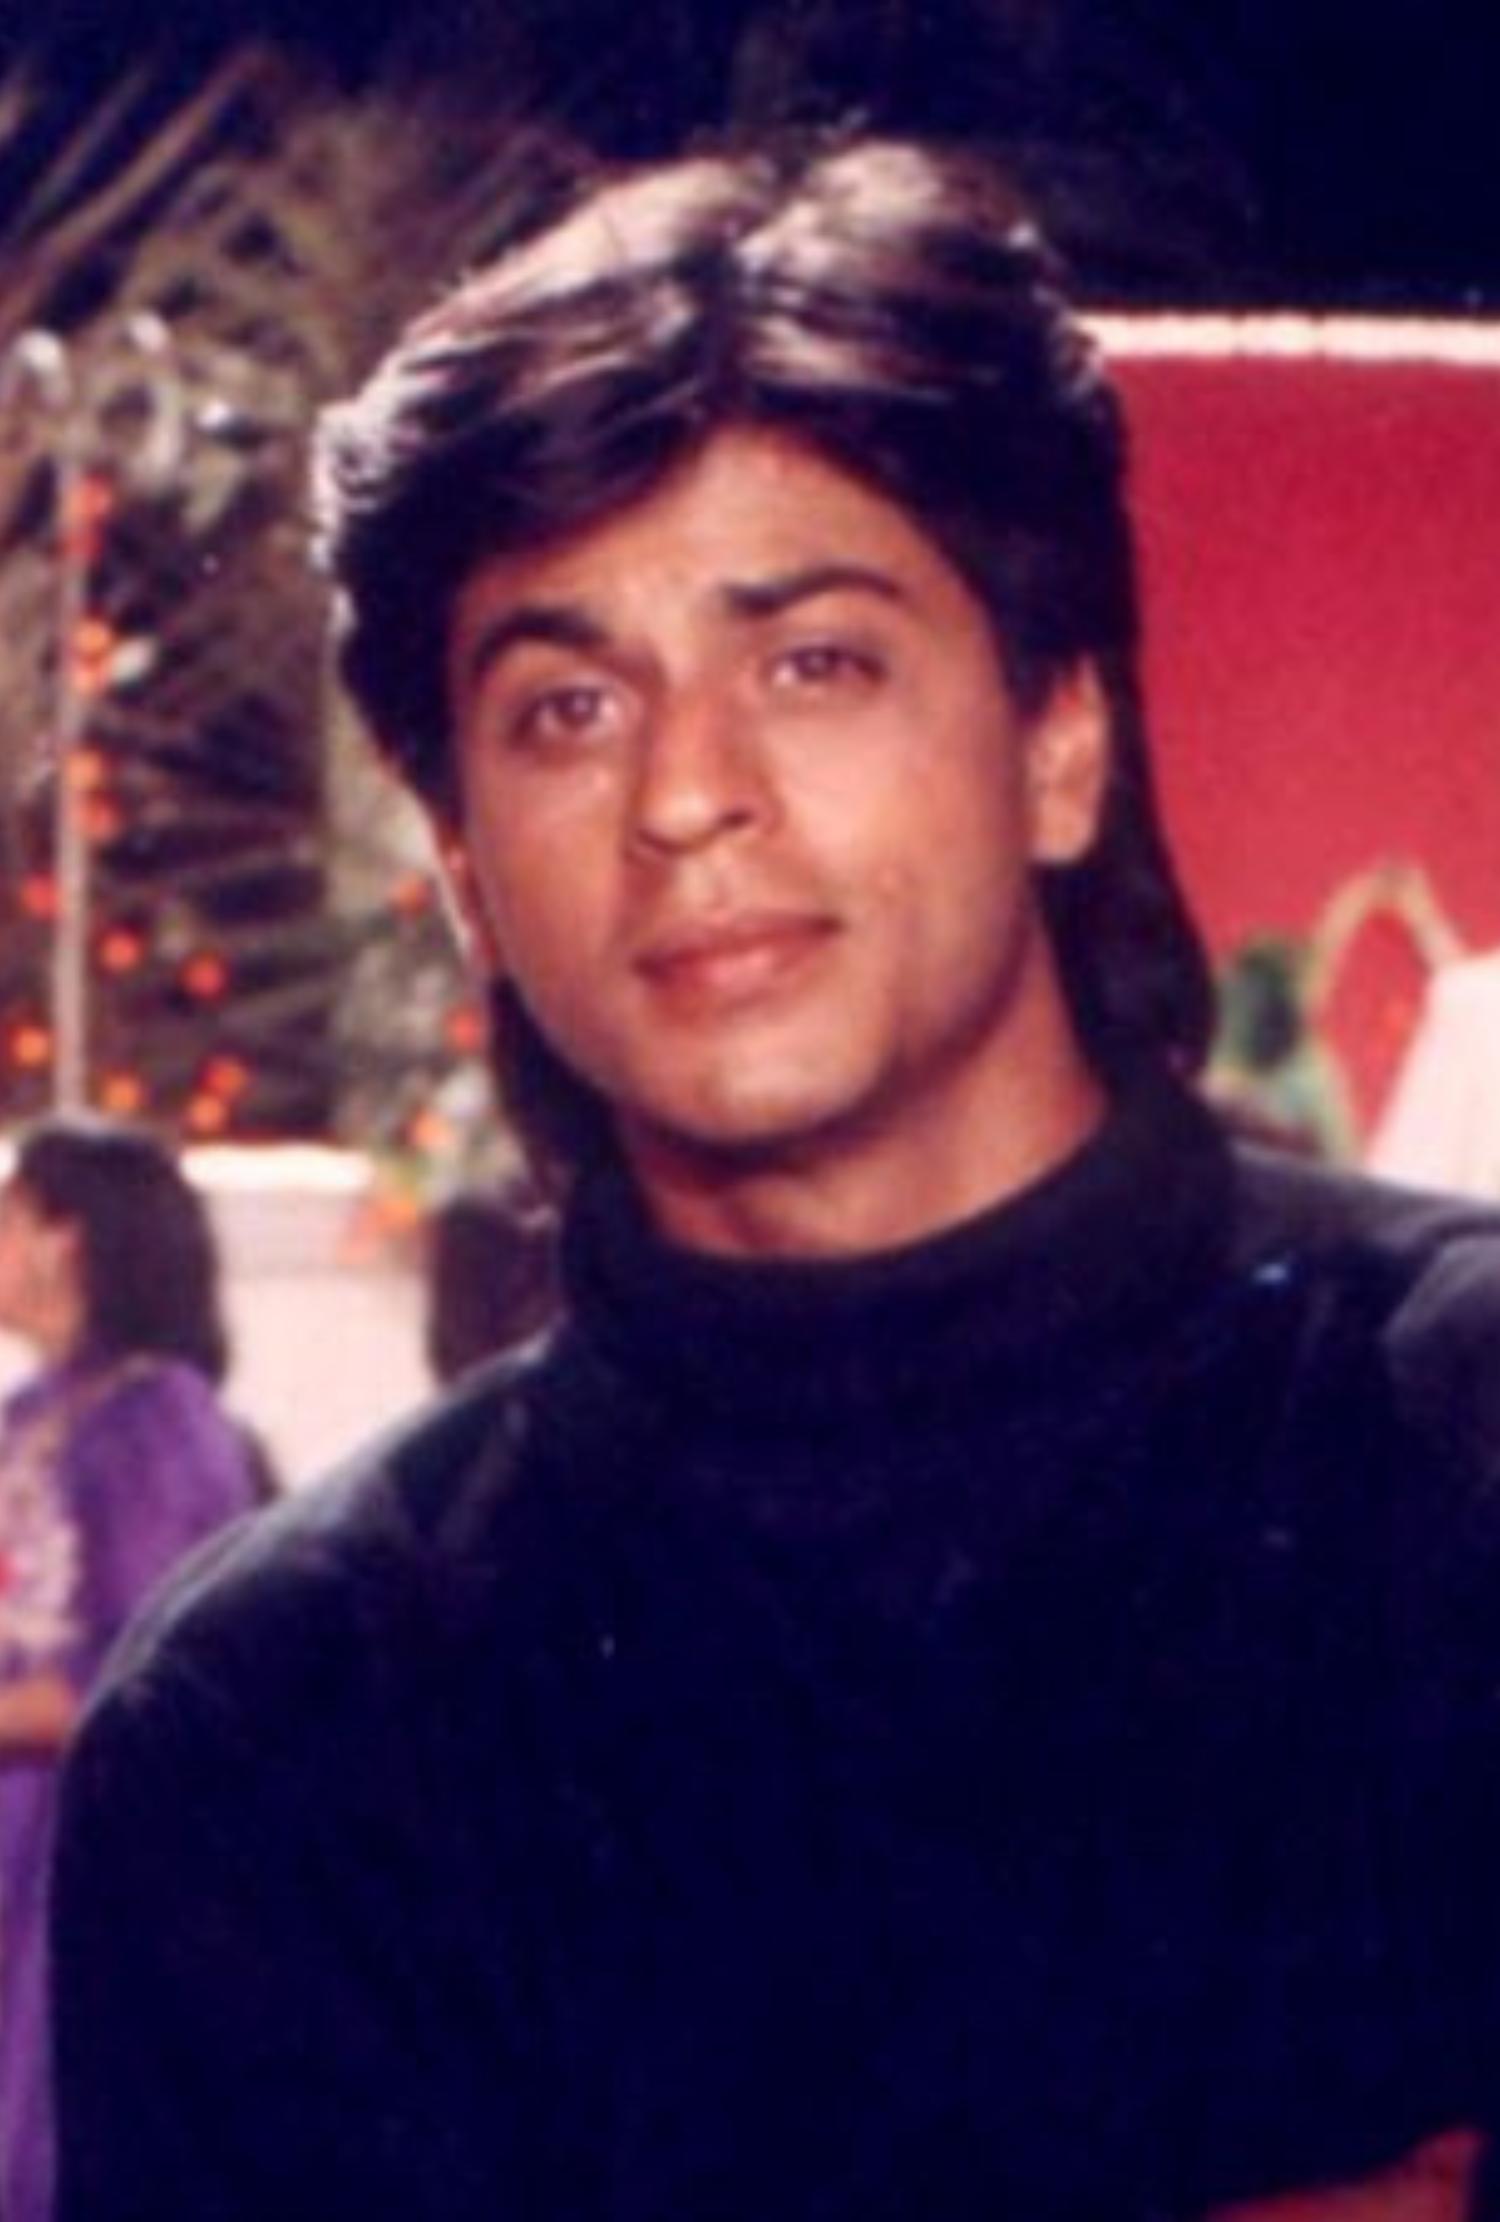 Then: The charming 'Raja' who stole our hearts in the 90s